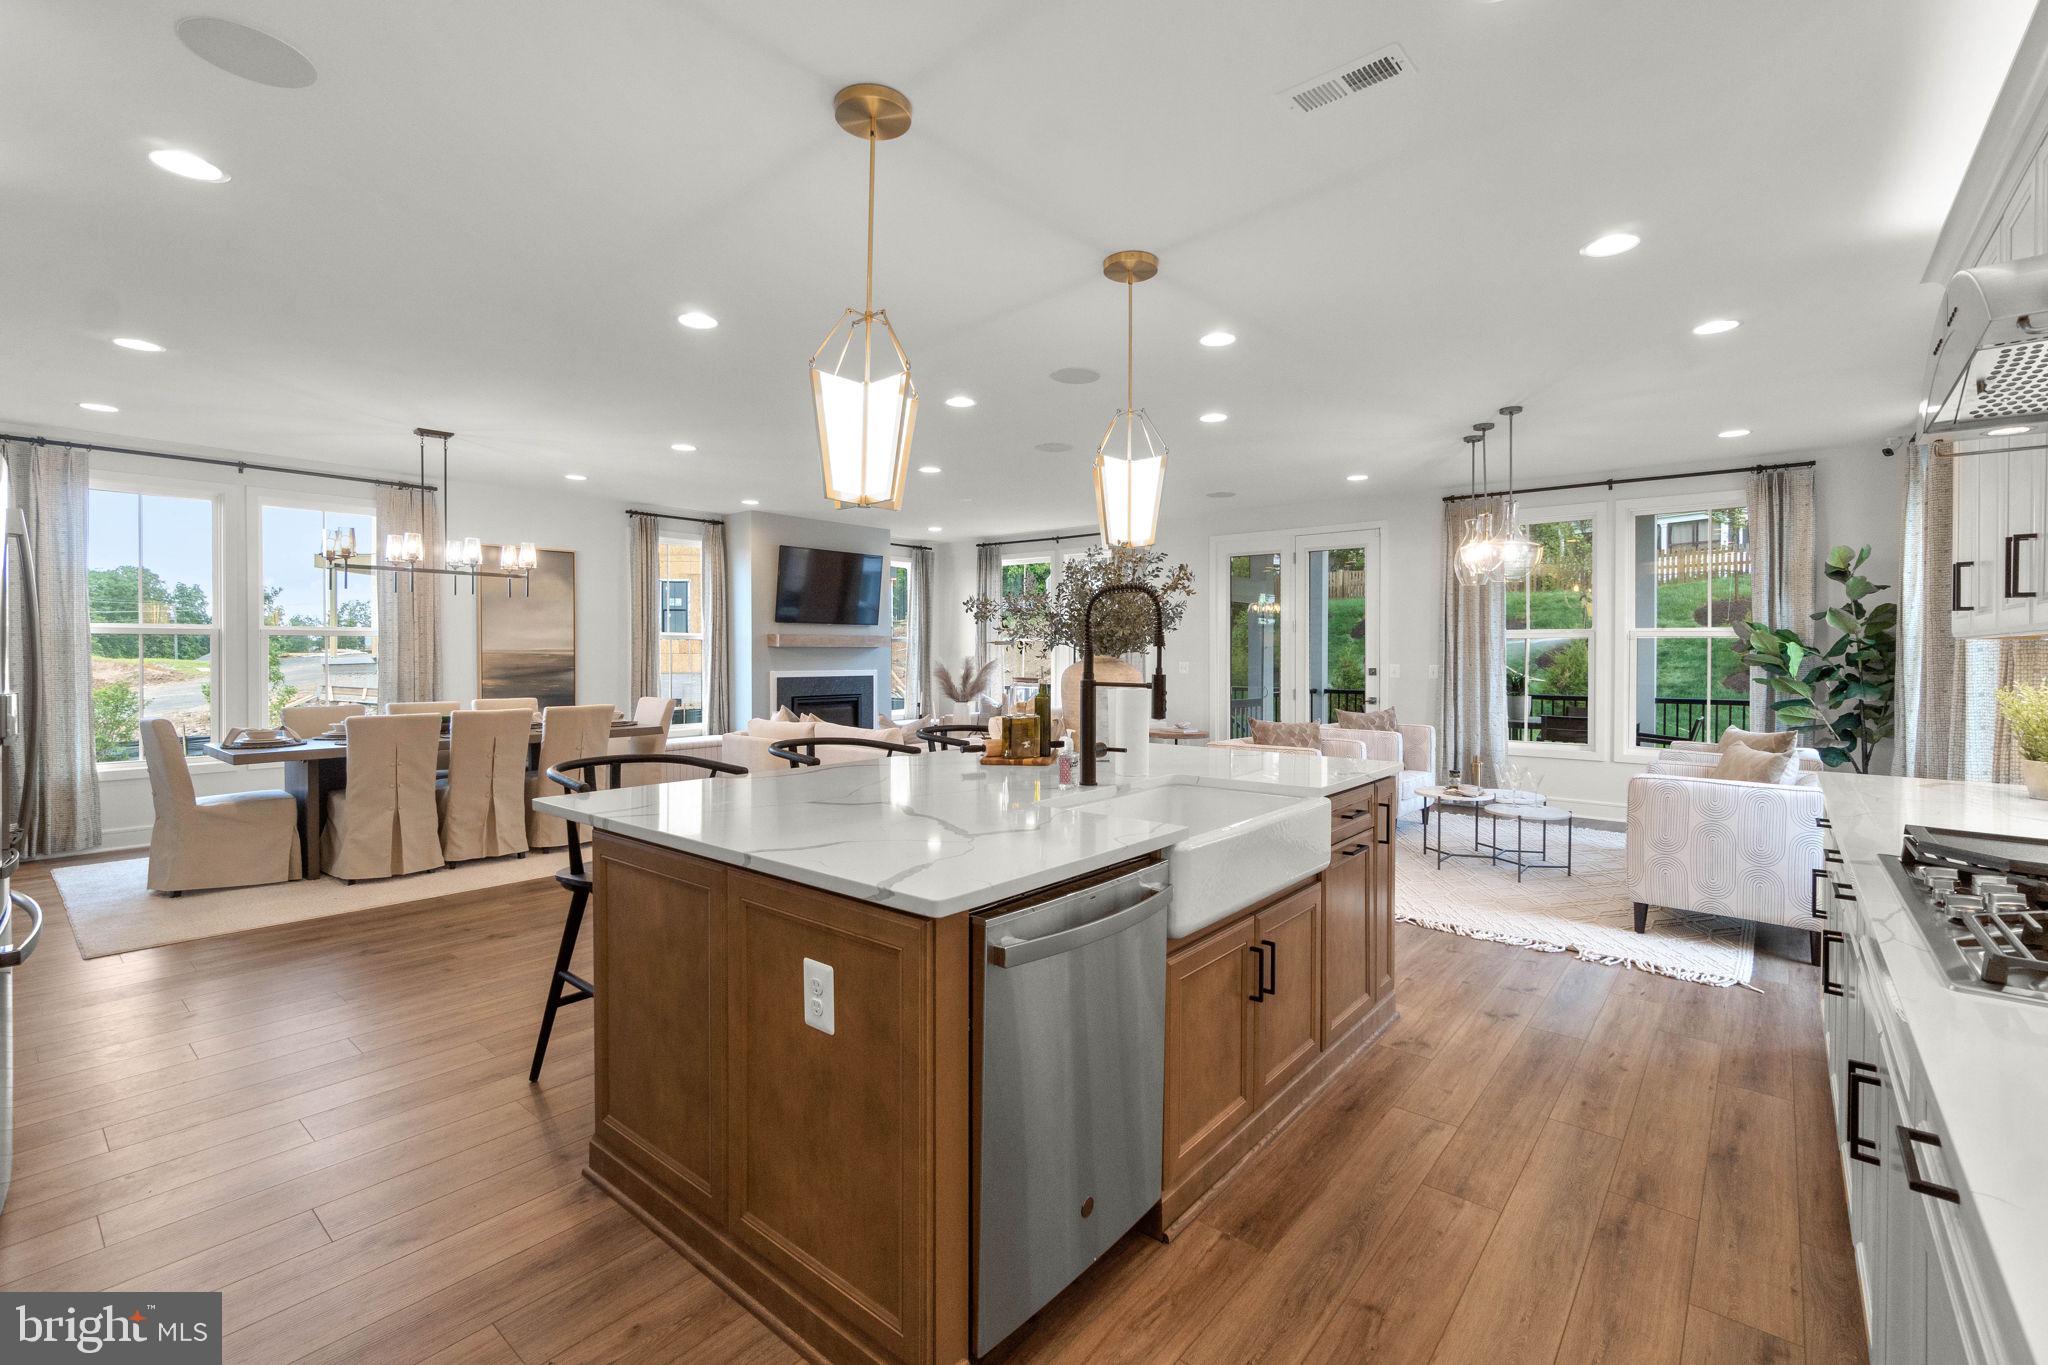 an open kitchen with kitchen island granite countertop a large center island and a wooden floor